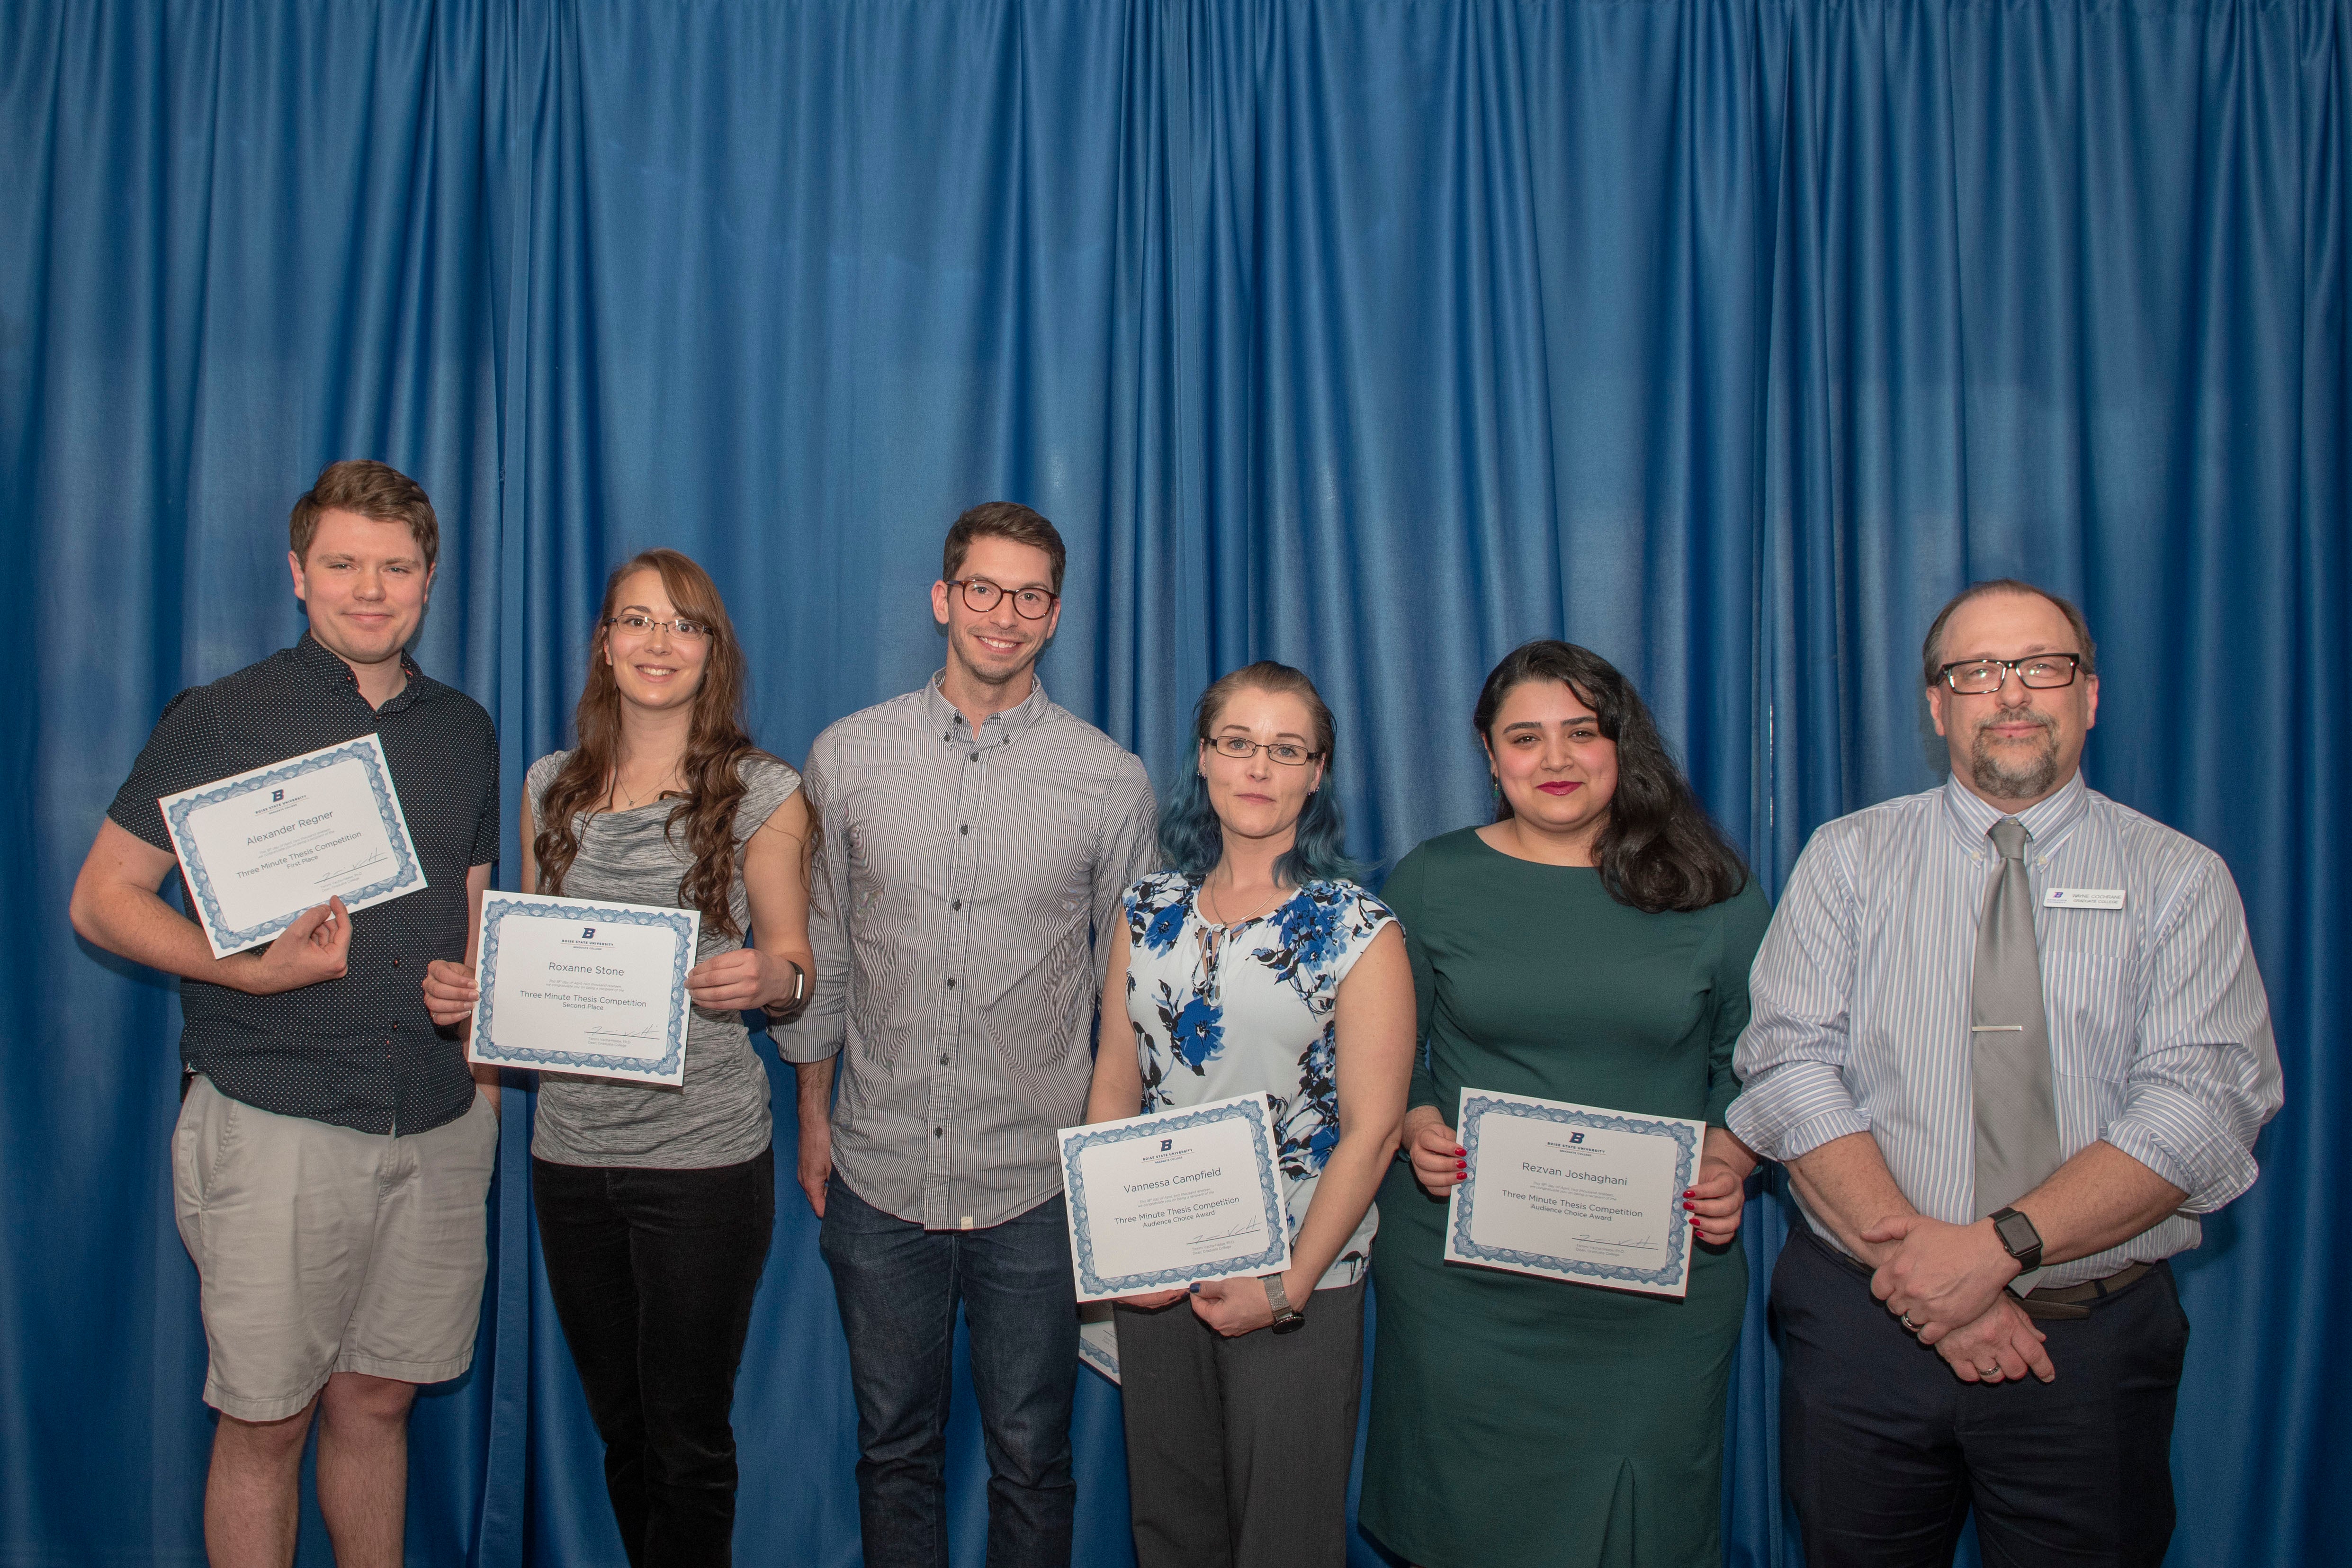 Three Minute Thesis Award winners pictured 